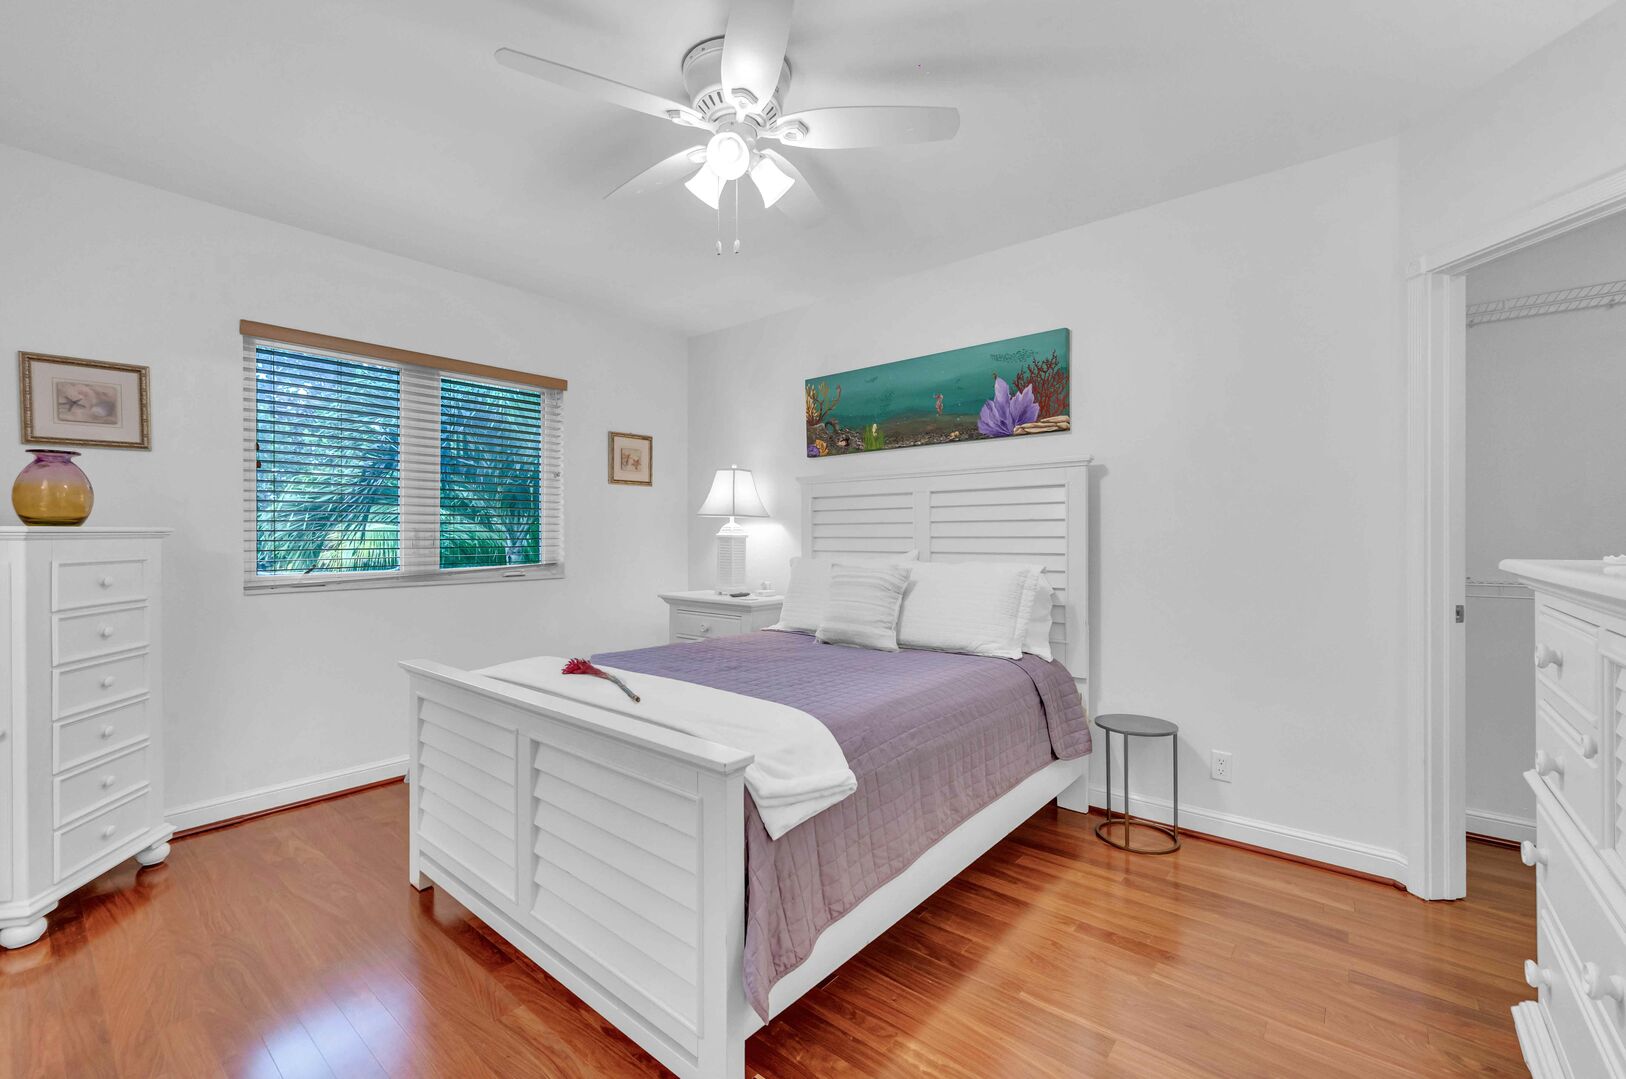 The third bedroom also features a queen-sized bed and a wall mounted 40" Smart T.V.